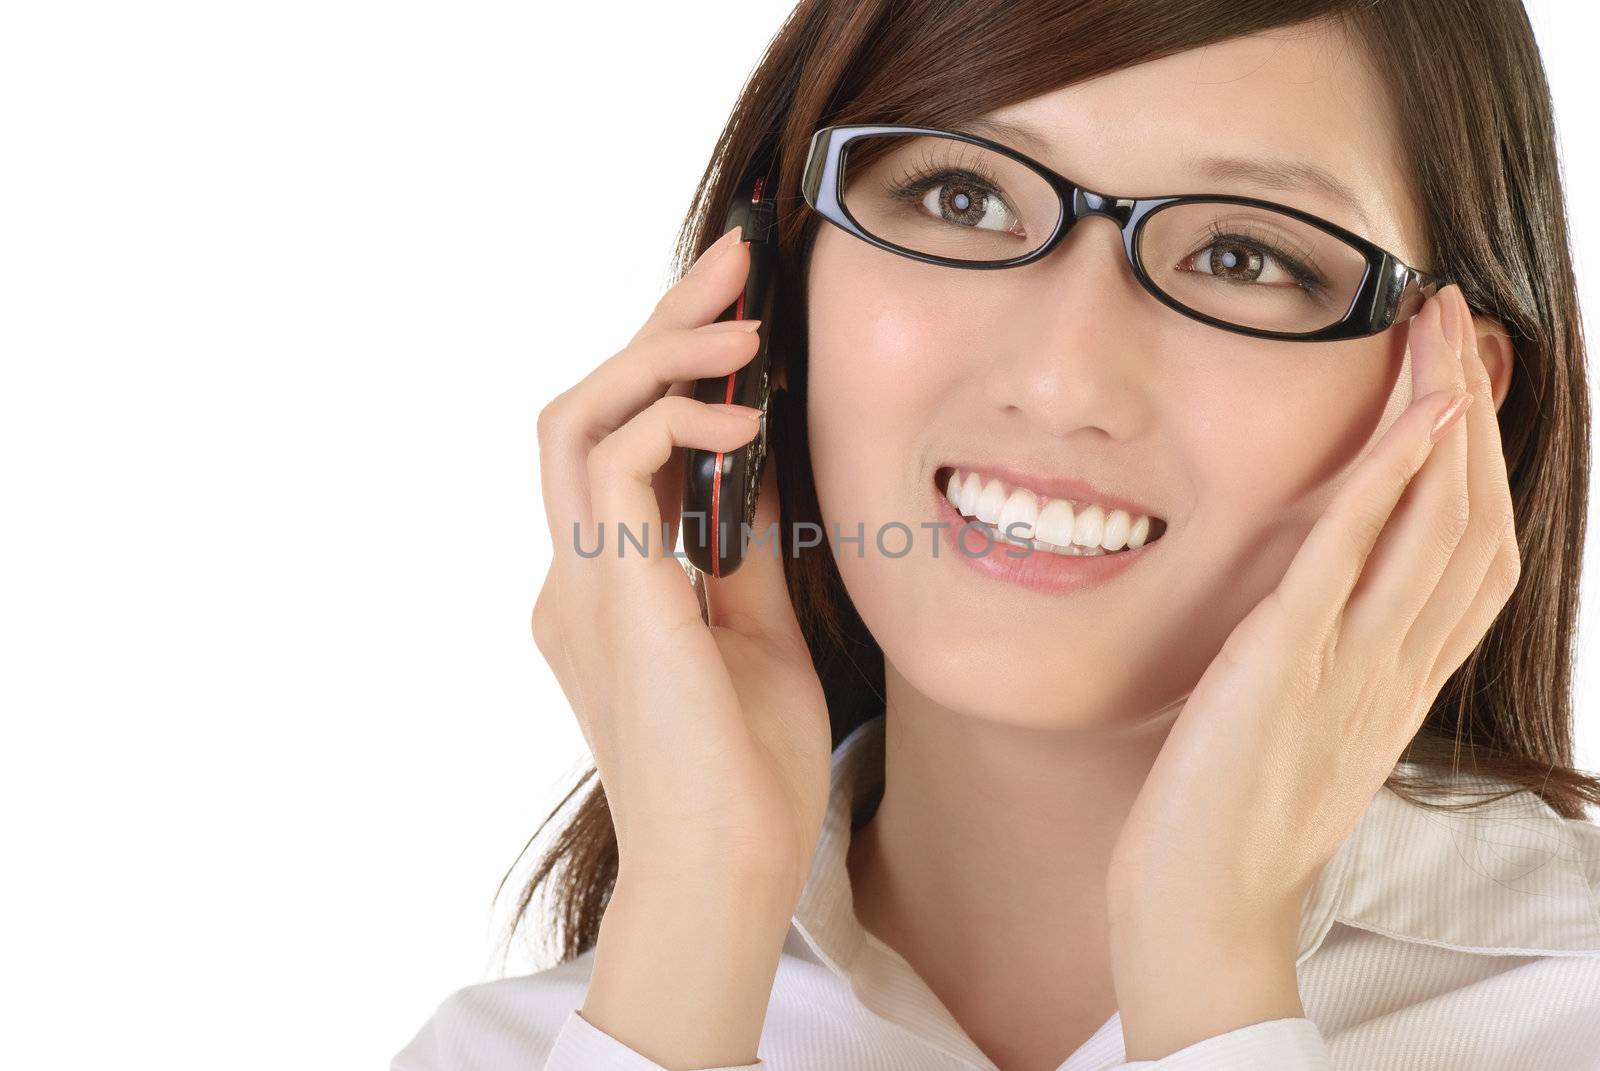 Portrait of Asian businesswoman with cellphone closeup image.